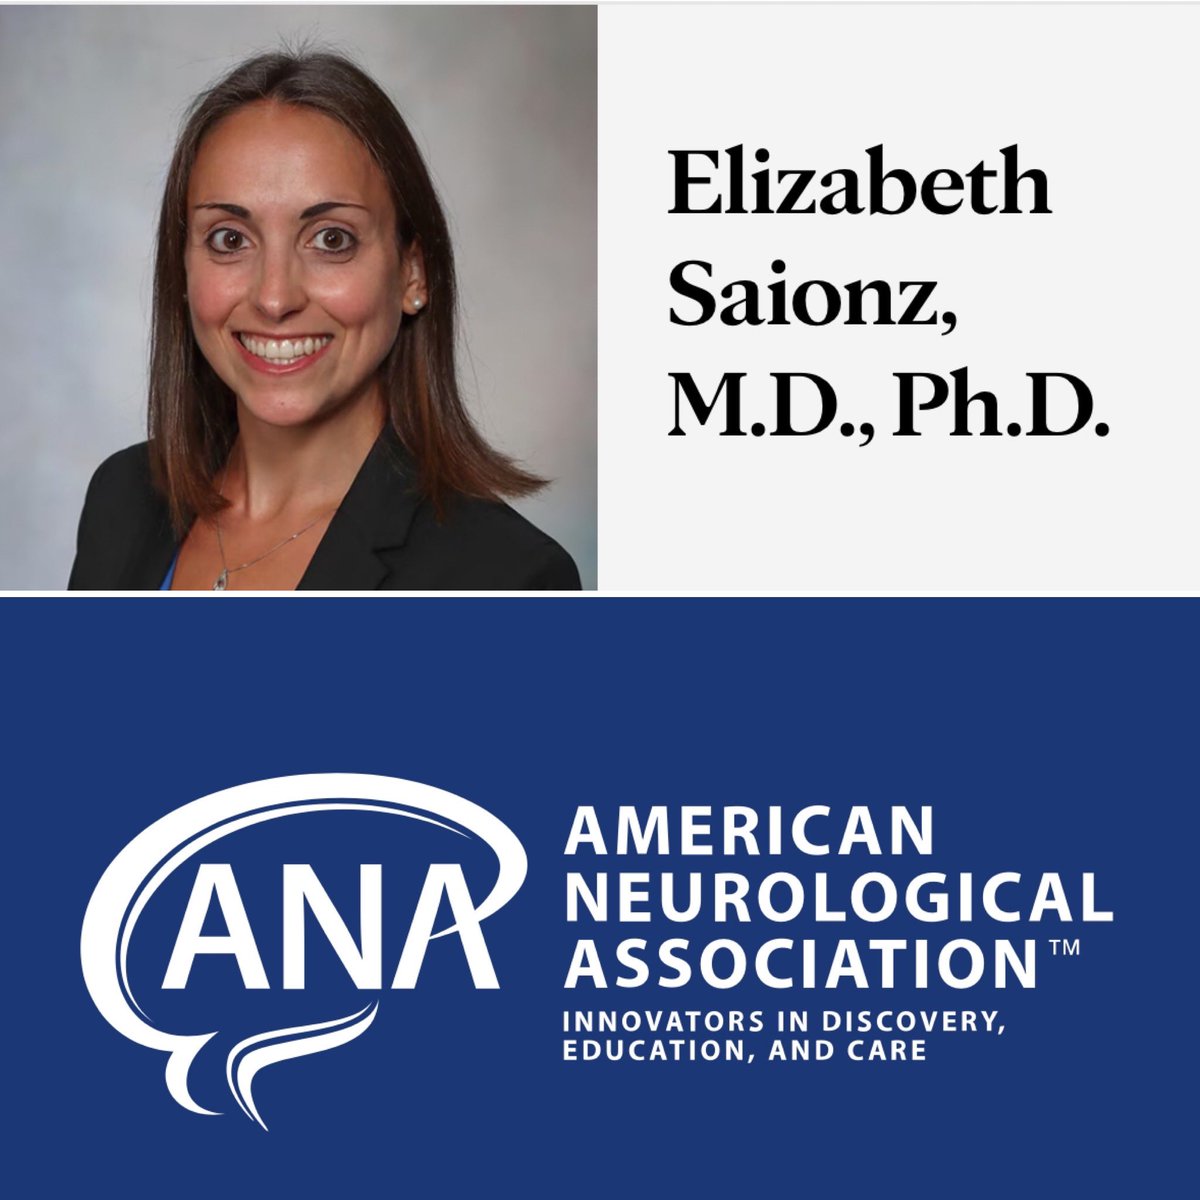 Congrats to our PGY2 resident, Dr. Elizabeth Saionz, who has been accepted into the ANA Futures Program! #ana #neurology #careerdevelopment 🧠👏👏👏